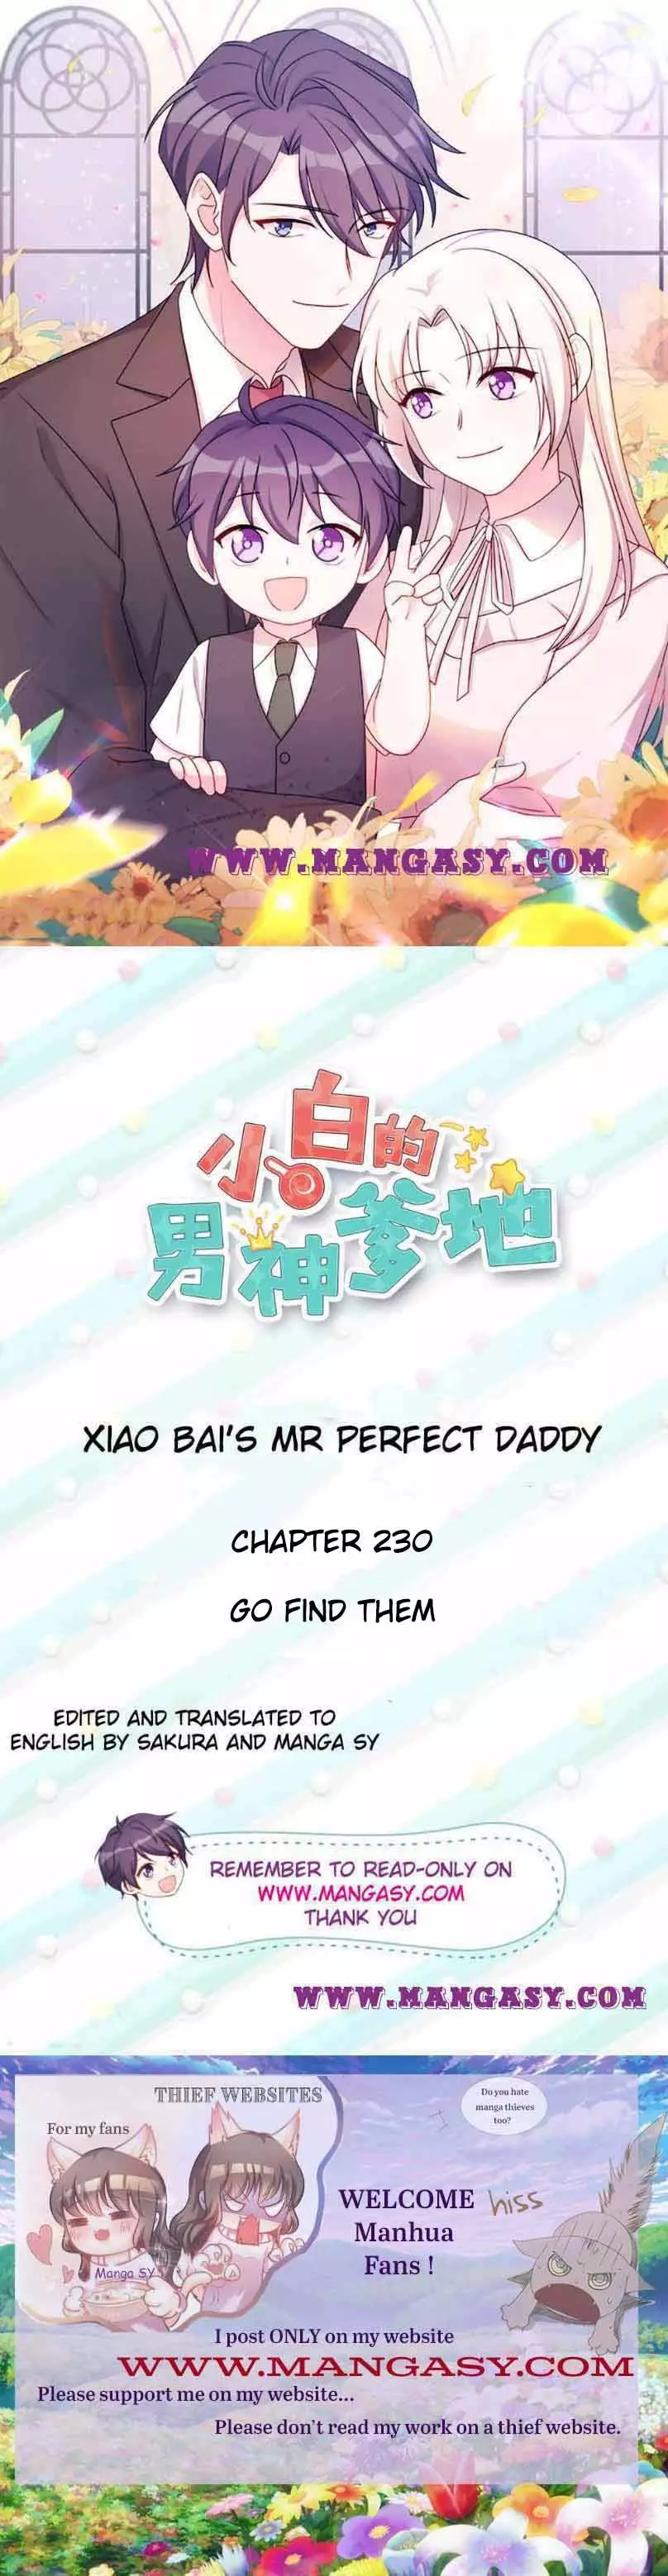 Xiao Bai’S Father Is A Wonderful Person - 230 page 1-41f0d5a8